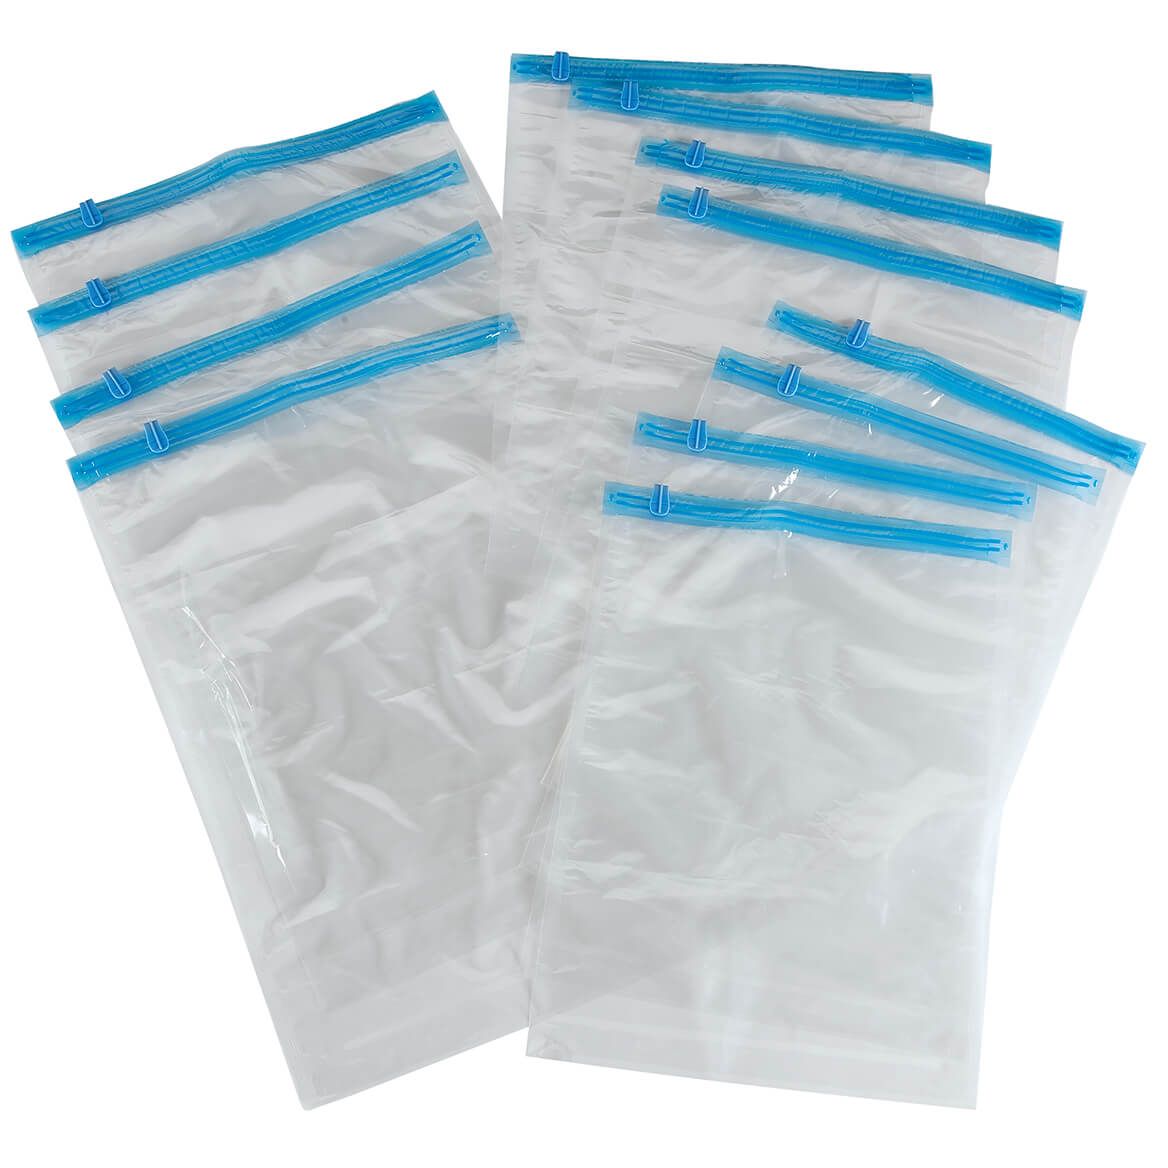 Travel Compression Bags, Set of 12 + '-' + 374287